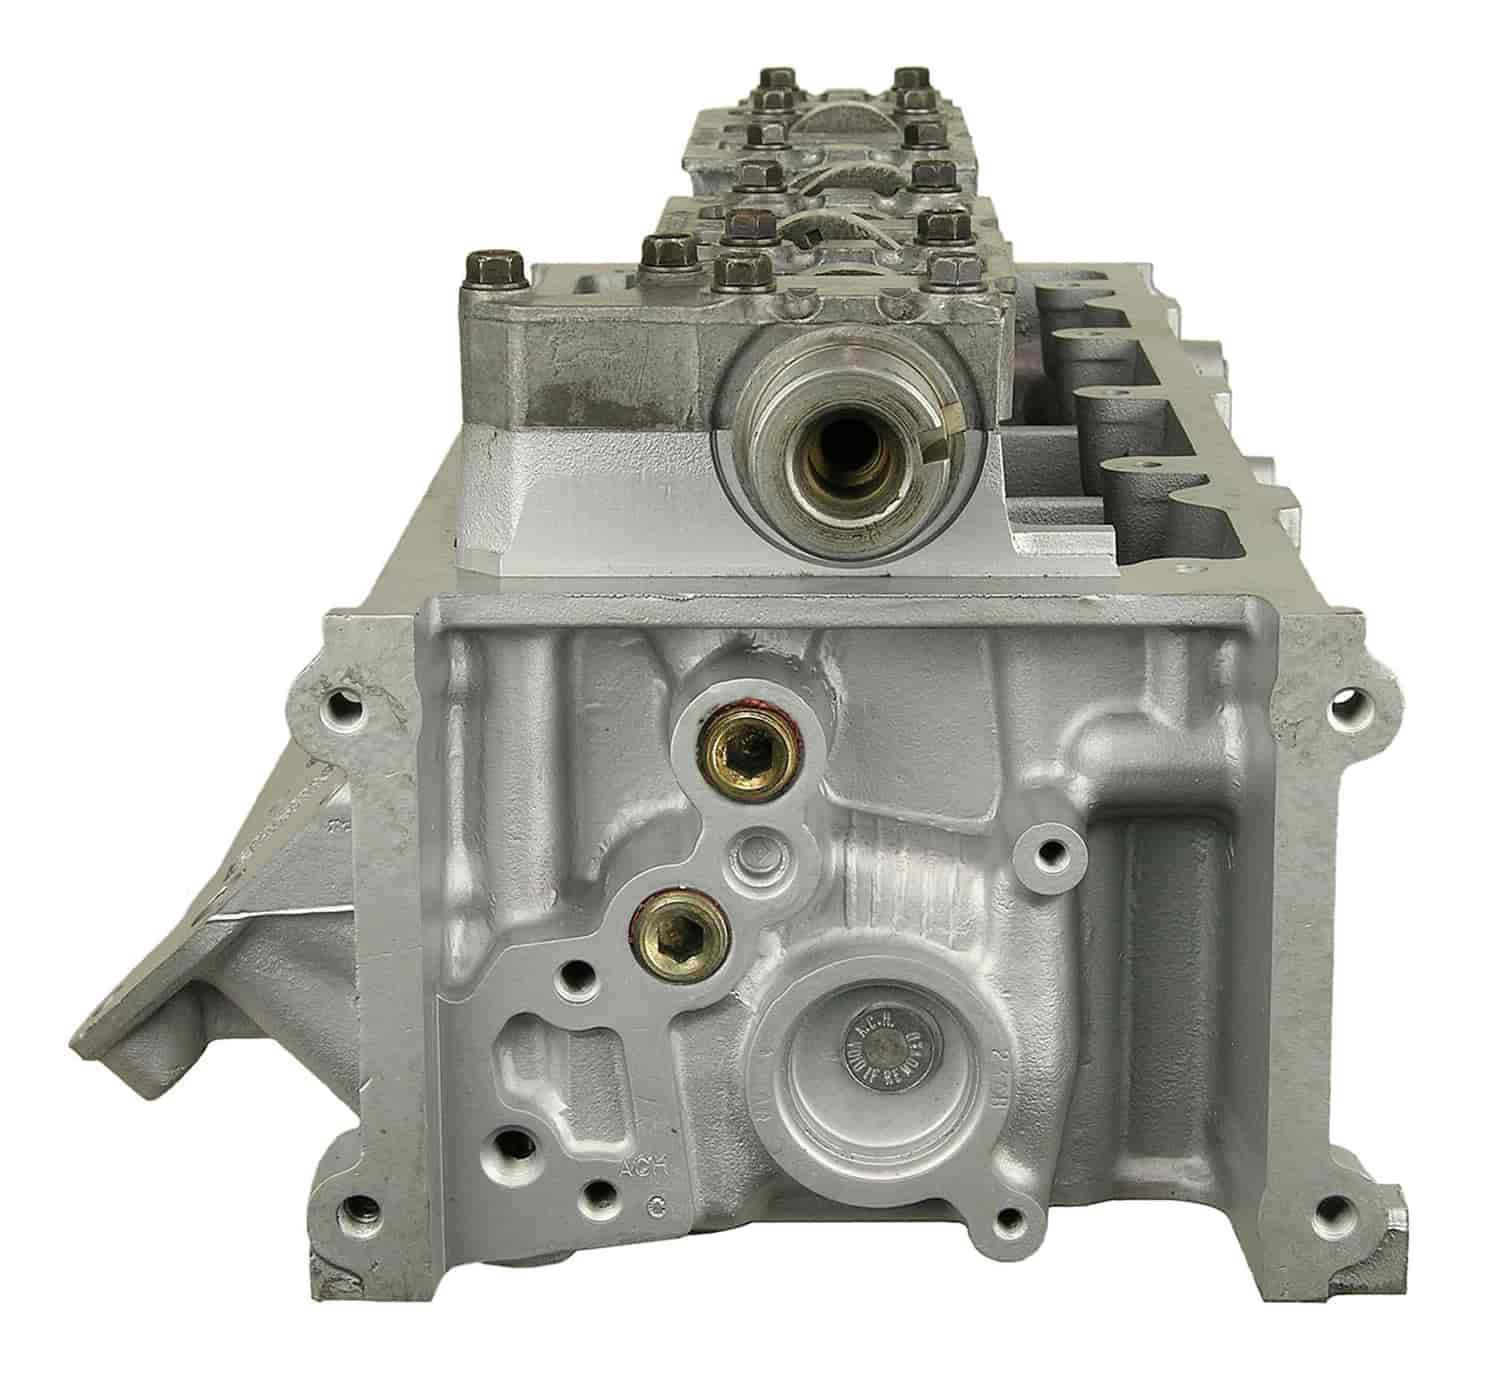 Remanufactured Cylinder Head for 1991-1992 Ford/Lincoln/Mercury with 4.6L V8